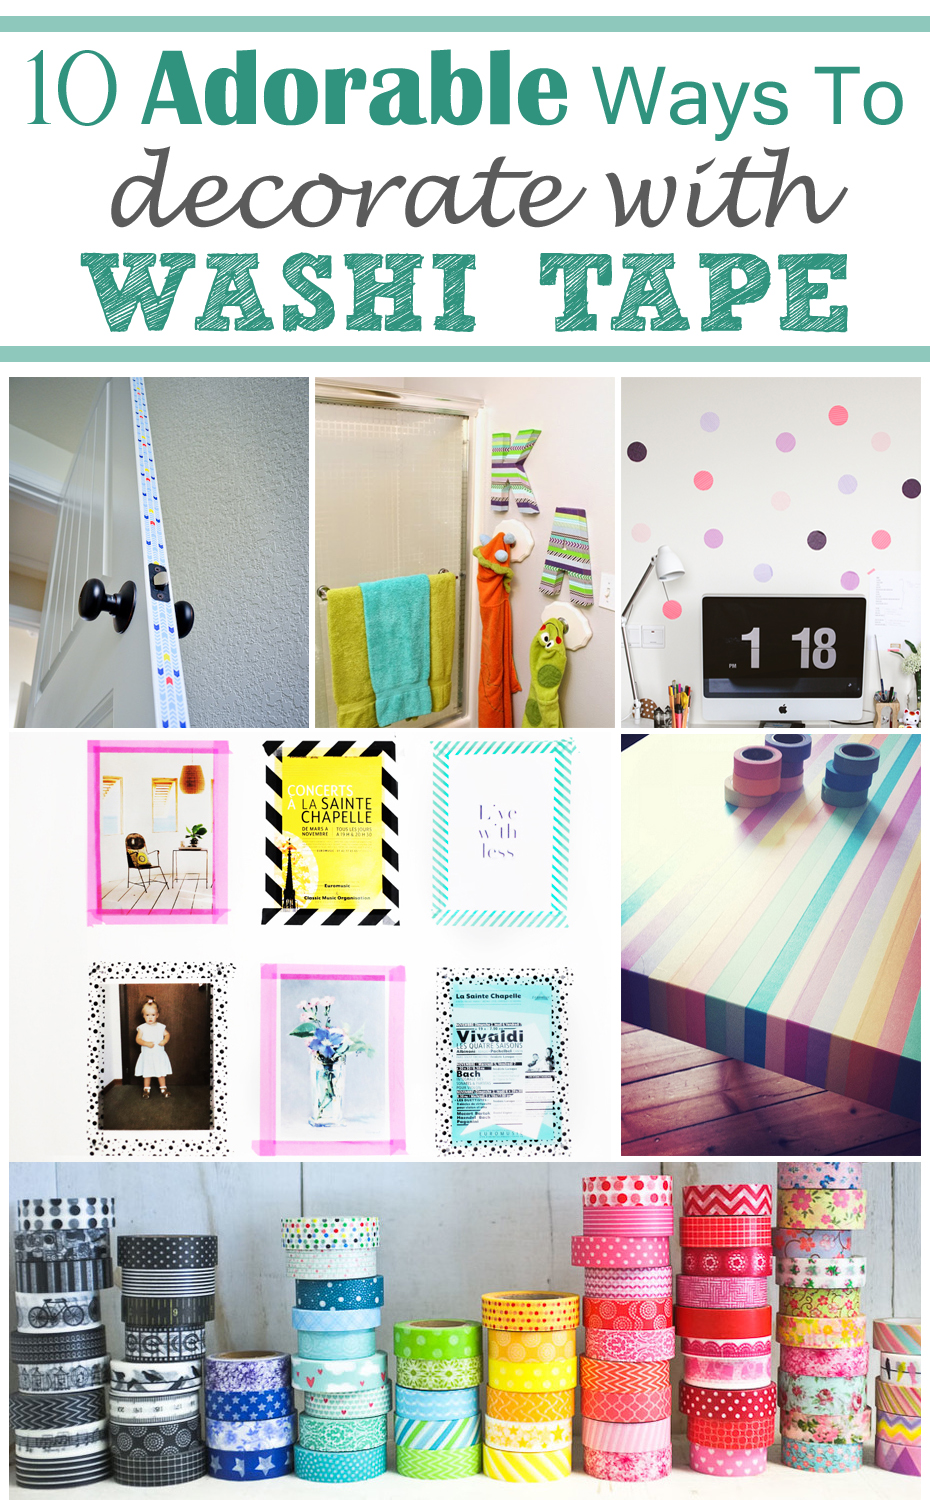 How to Decorate with Washi Tape 